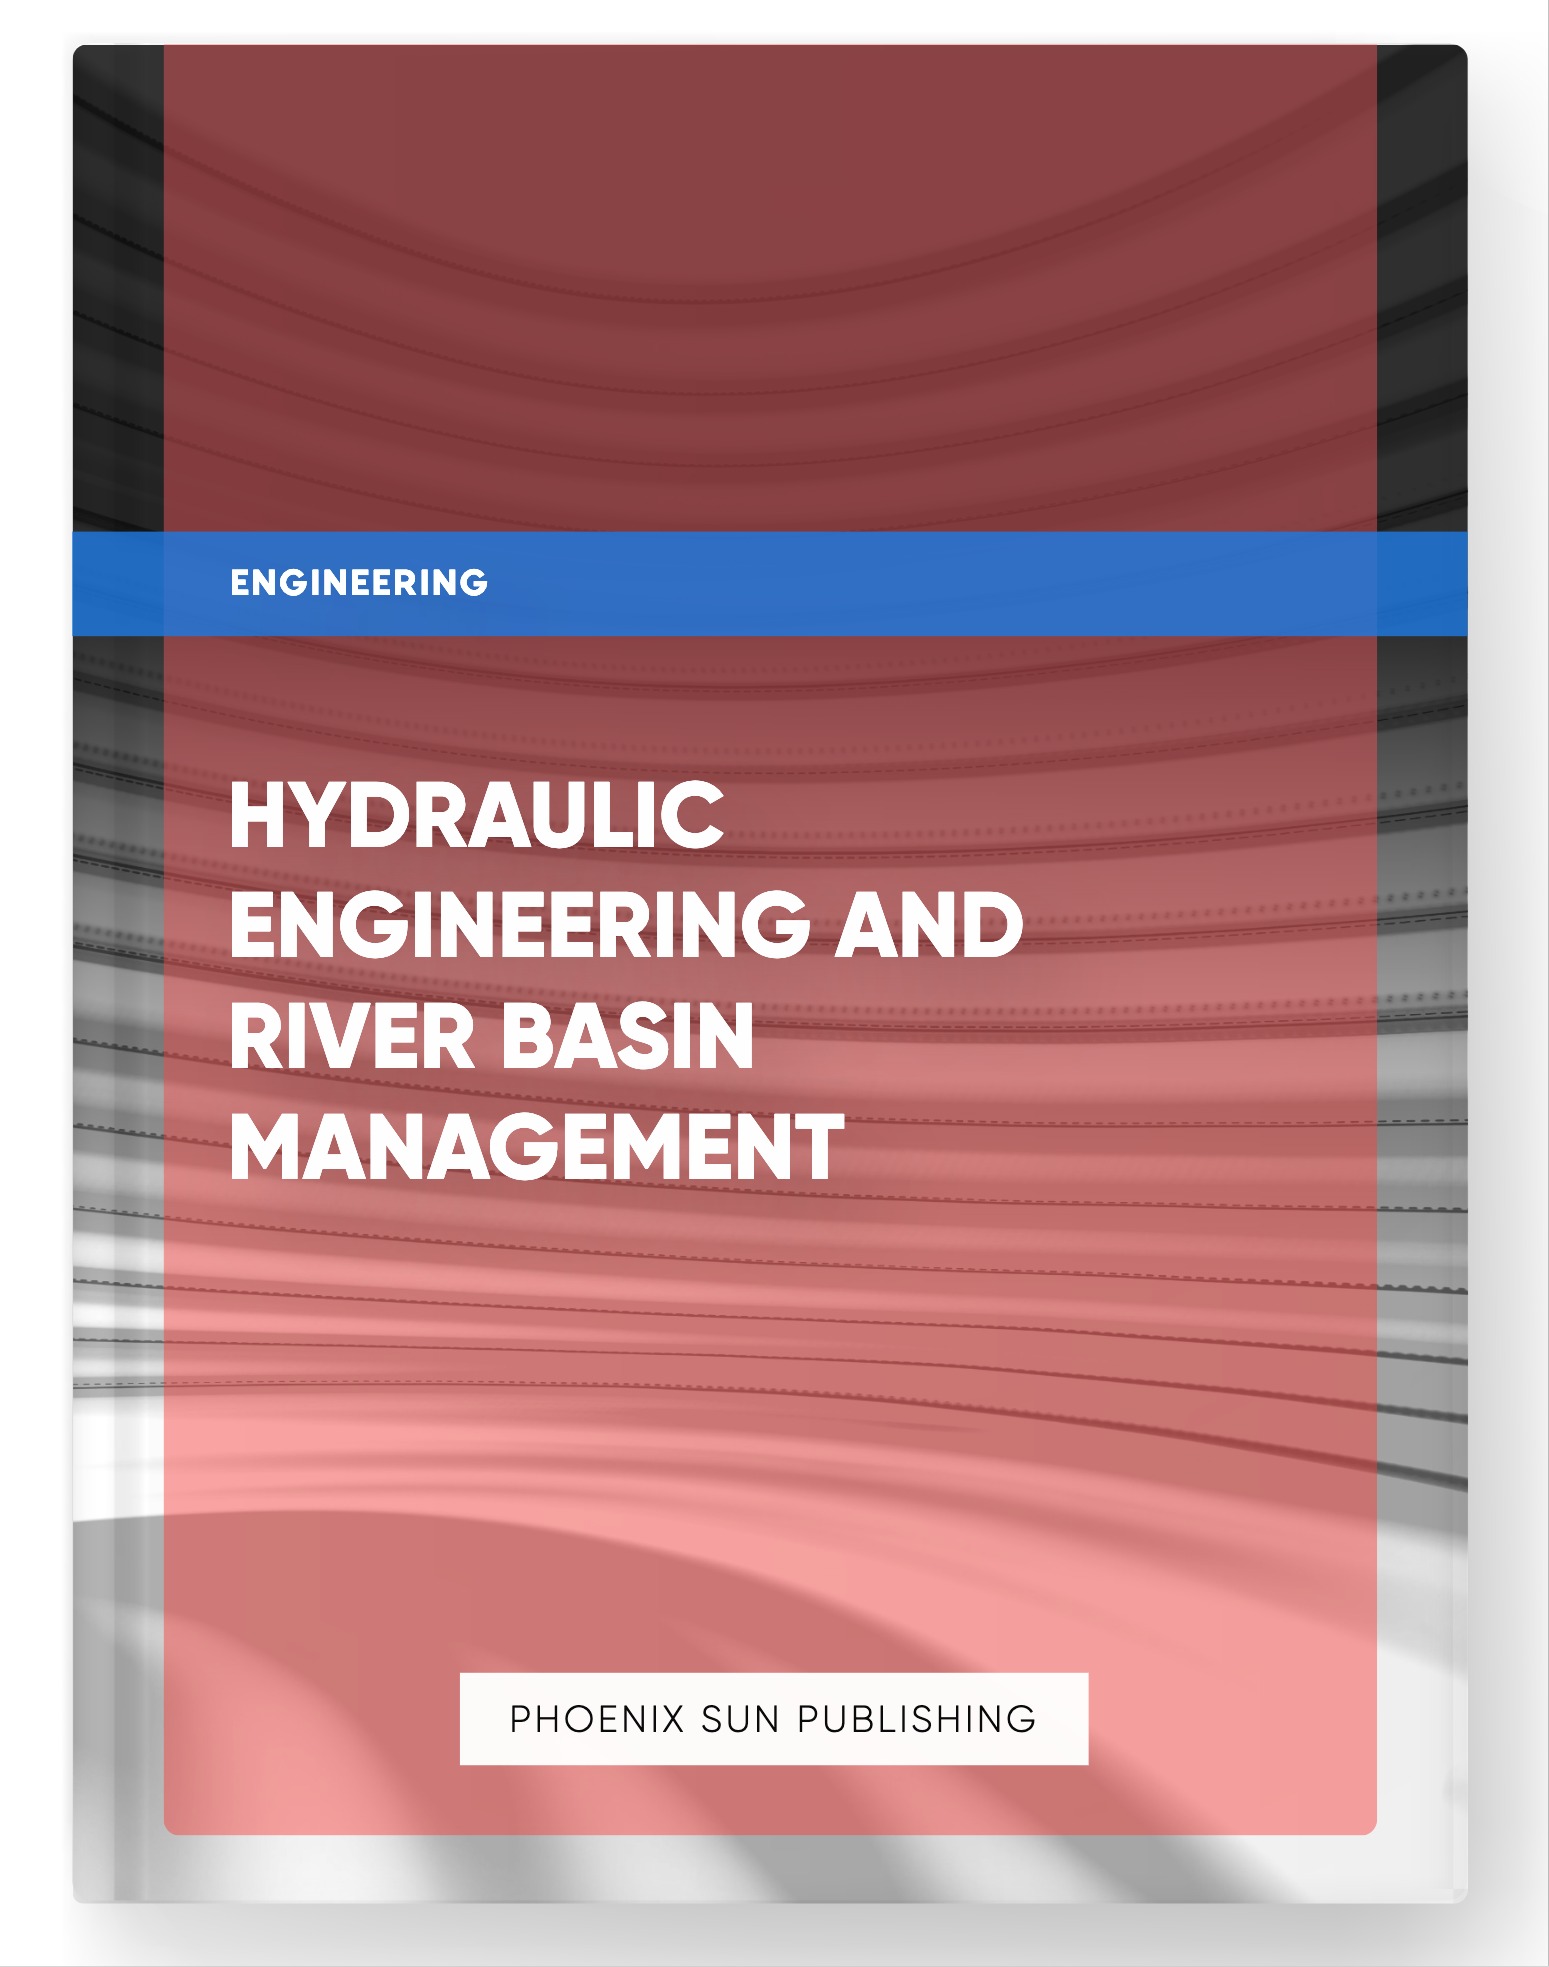 Hydraulic Engineering and River Basin Management